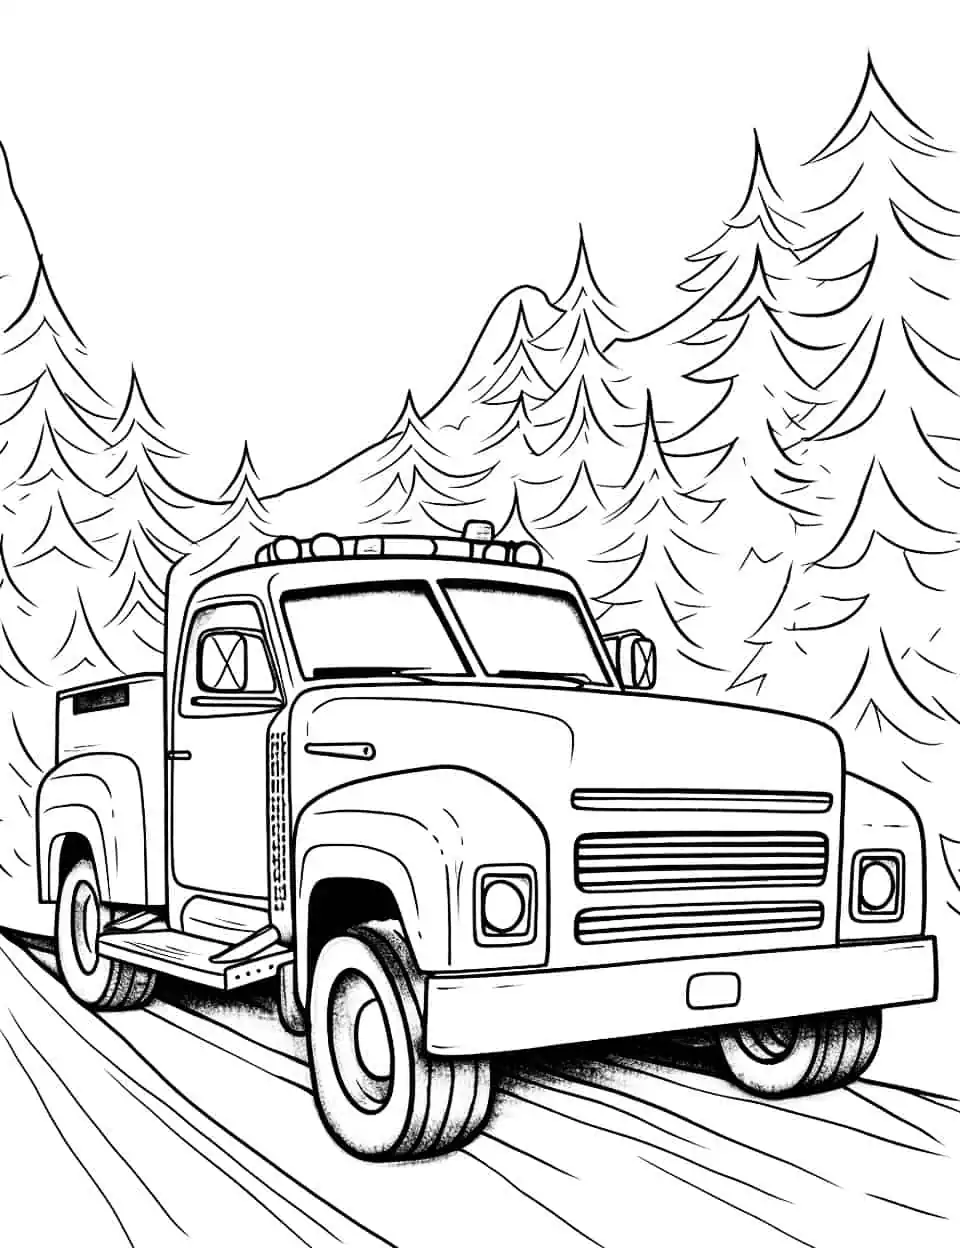 The Big Truck Adventure Car Coloring Page - A big truck on an adventurous journey.